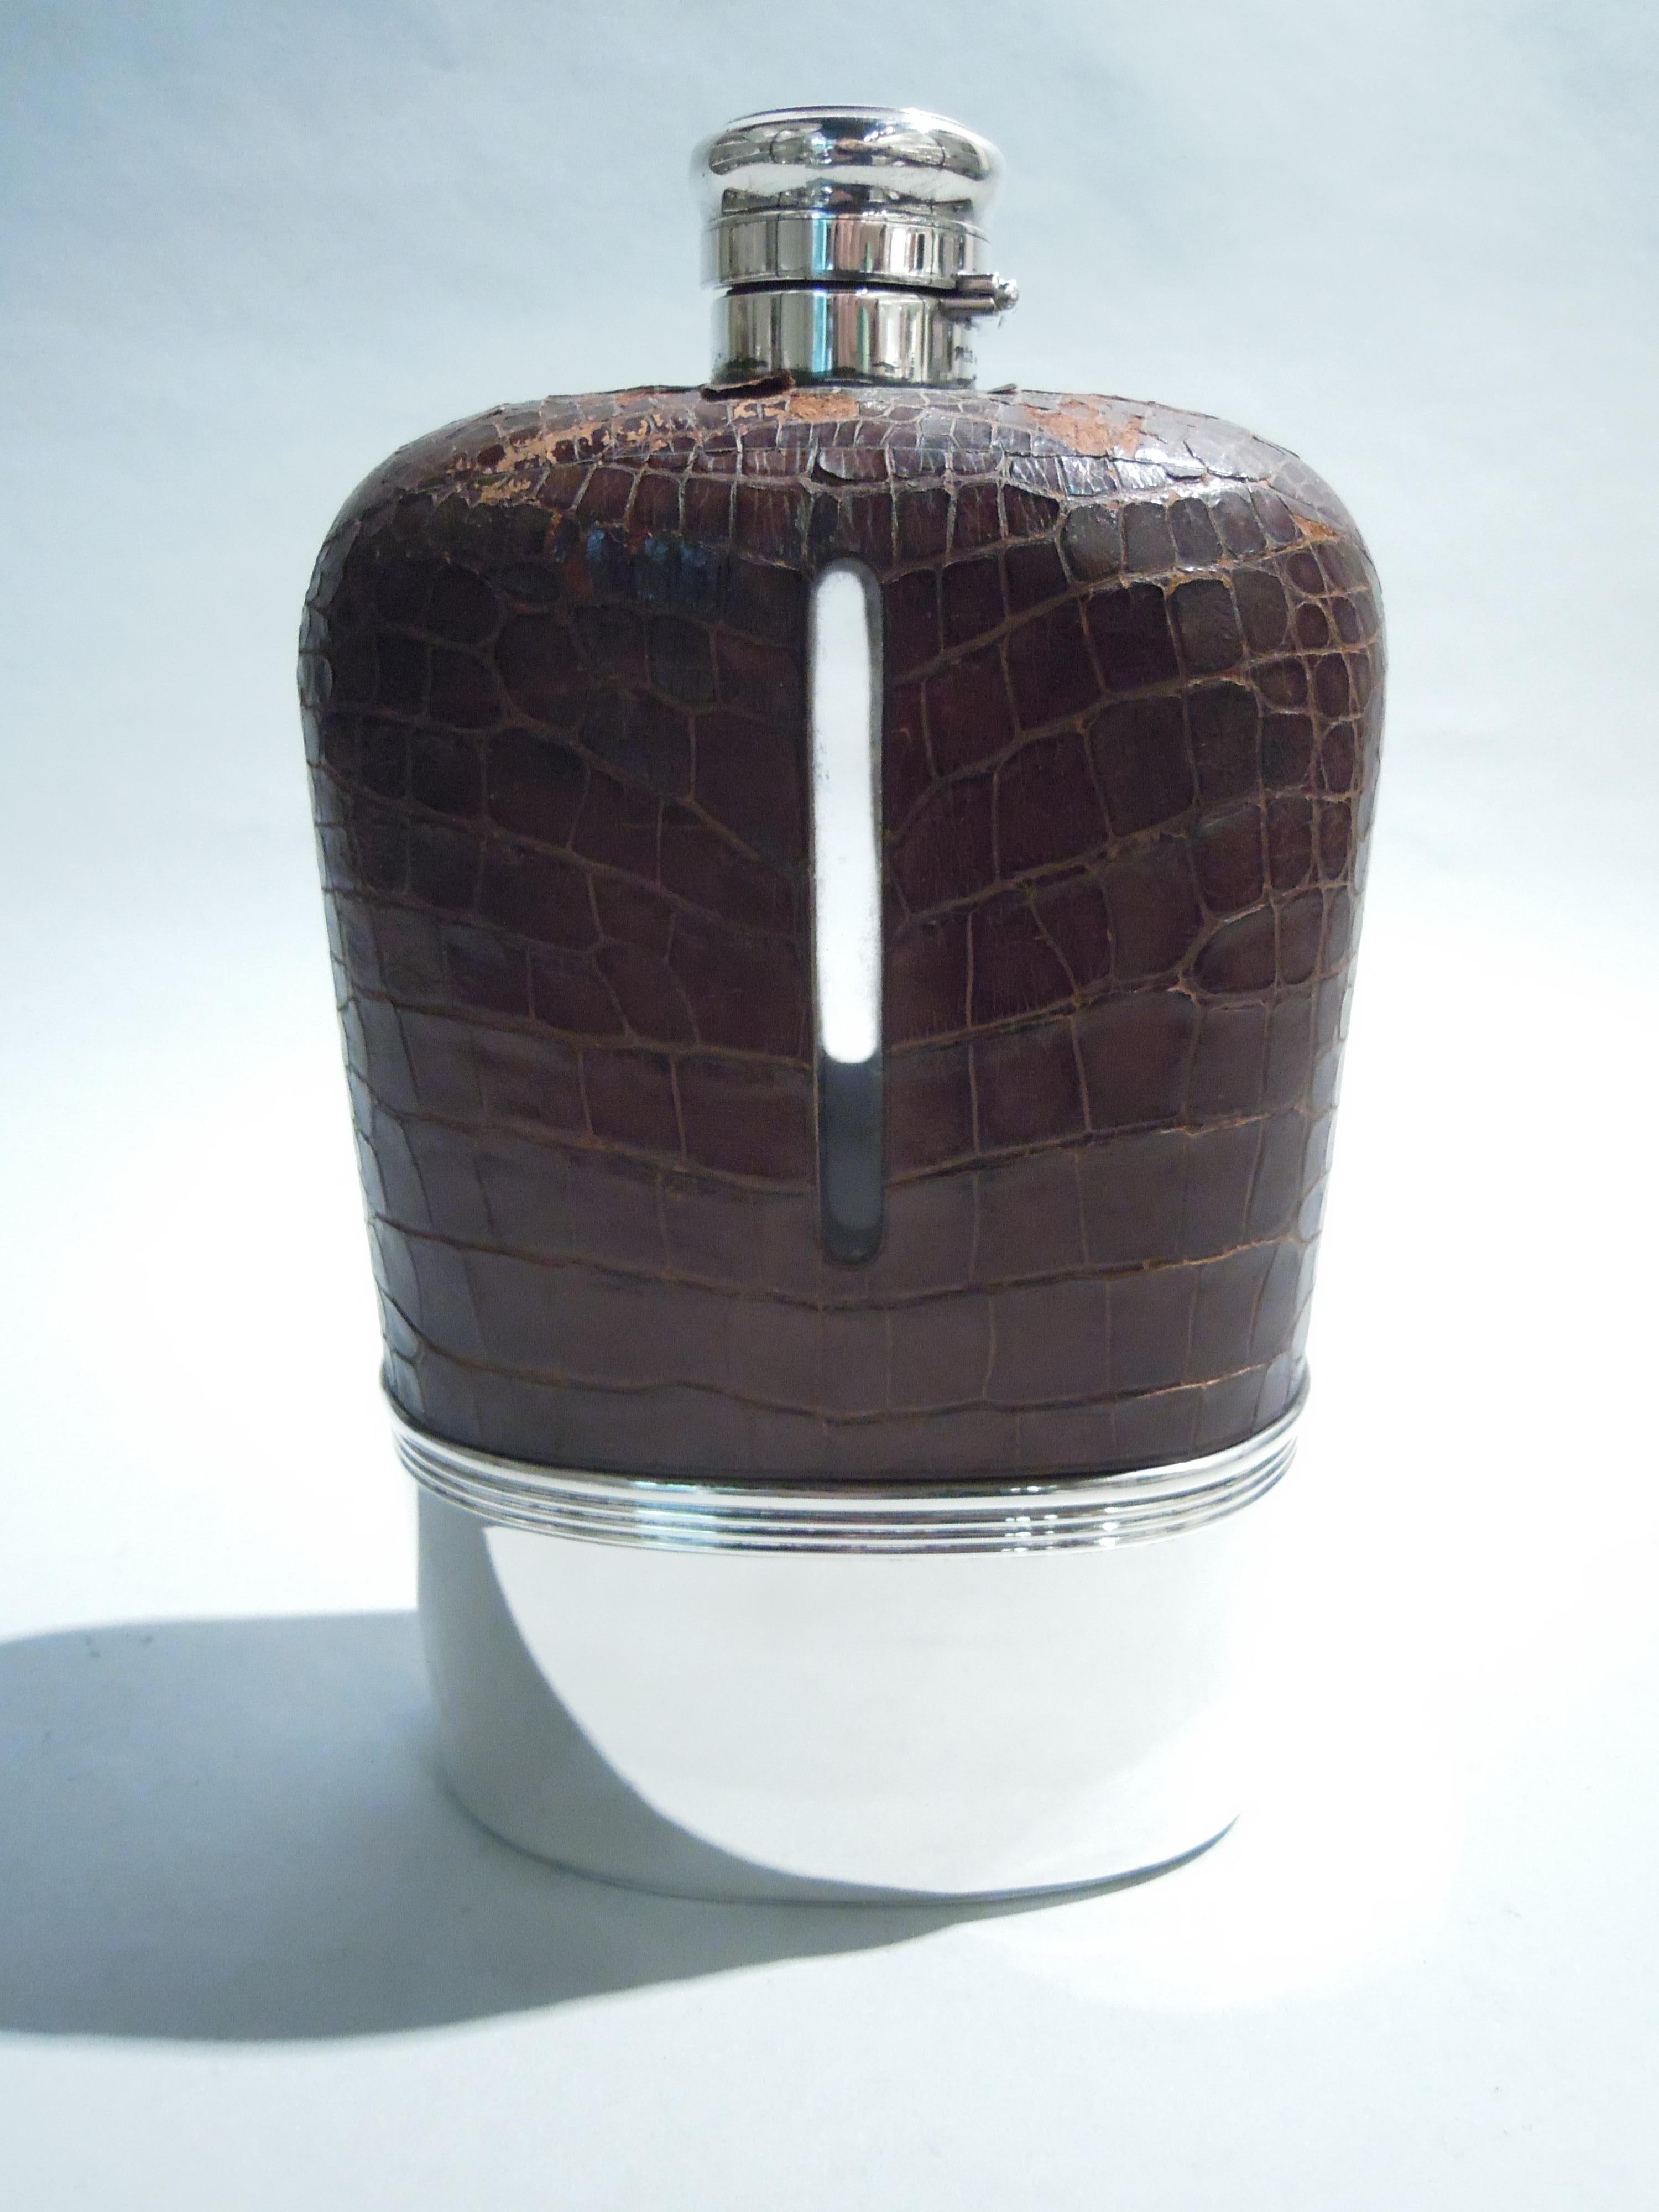 Victorian safari flask. Made by Gorham in Providence in 1896. Ovoid glass body. Top encased in leather with cutout tubular windows. Bottom has detachable sterling silver cup. Cover hinged and cork-lined. Holds 4 pints of chest-hair growing